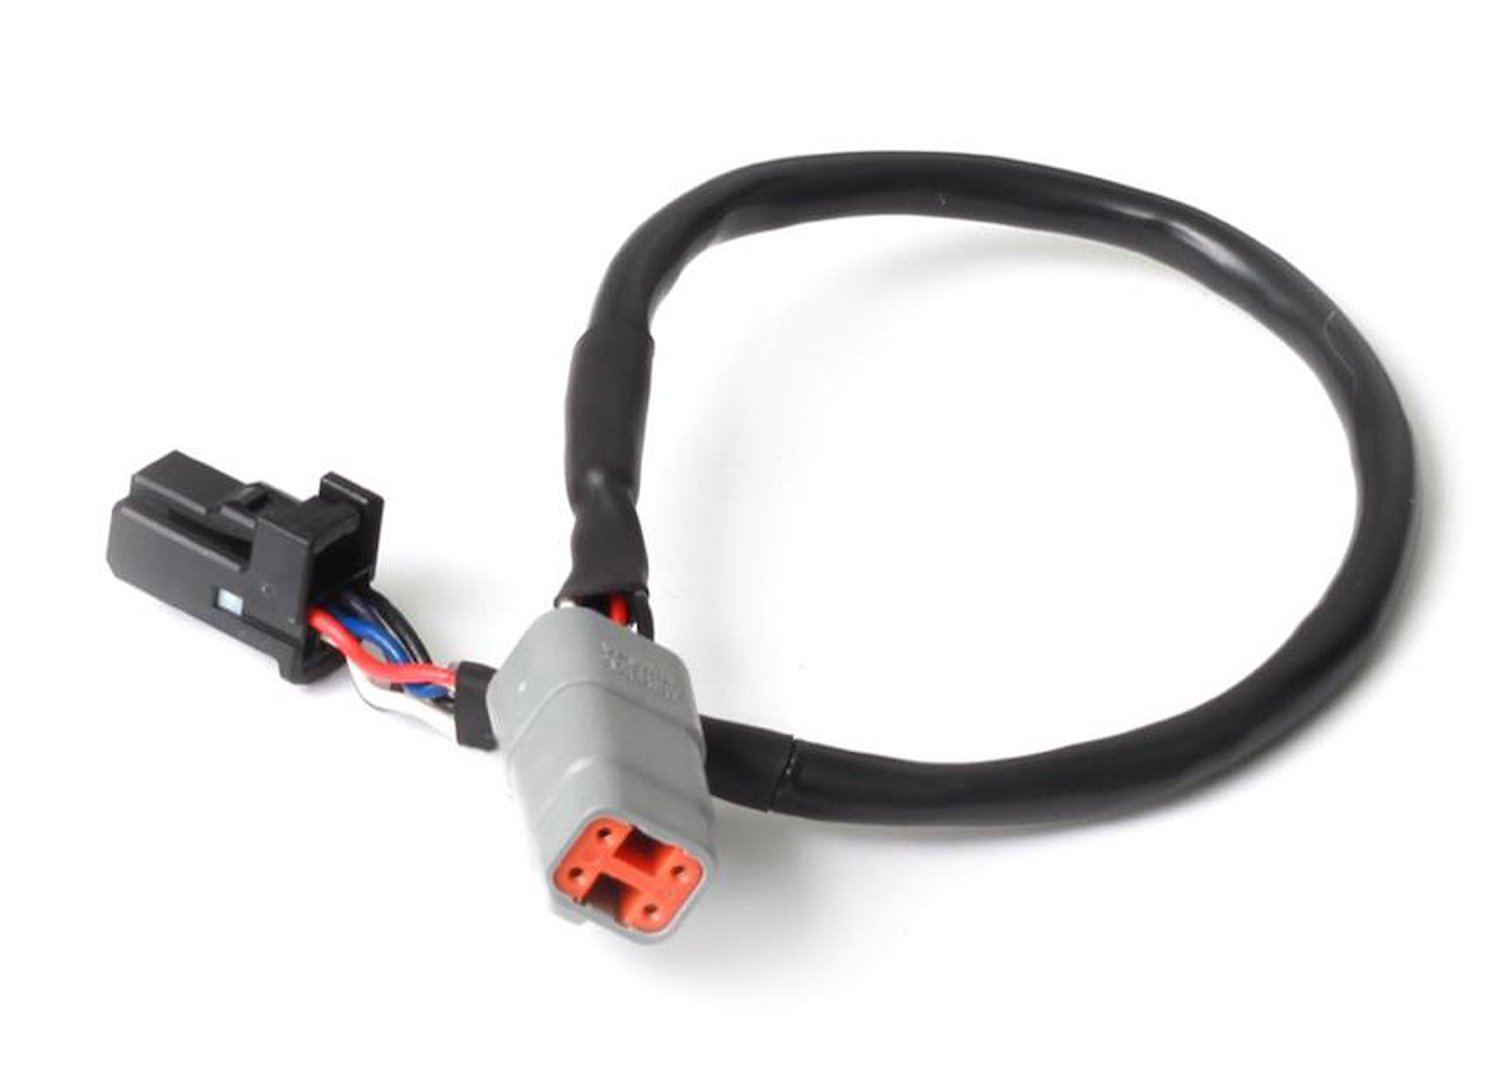 HT-130033 Elite CAN Cable, DTM-4, 8-Pin Black Tyco, 600 mm (24 in.)